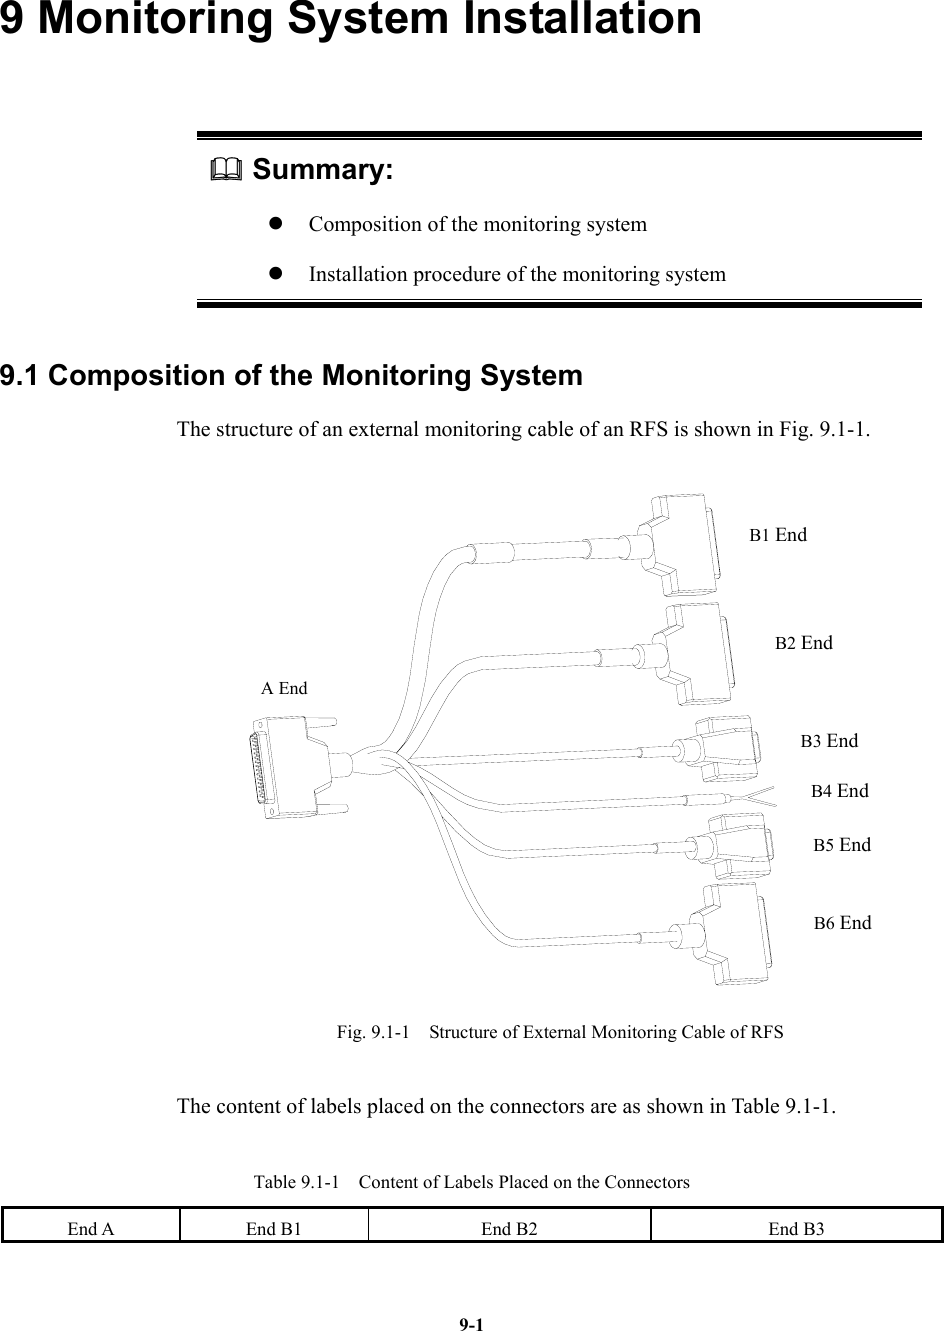   9-19 Monitoring System Installation  Summary: z  Composition of the monitoring system z  Installation procedure of the monitoring system 9.1 Composition of the Monitoring System The structure of an external monitoring cable of an RFS is shown in Fig. 9.1-1. A EndB1 EndB2 EndB3 EndB4 EndB5 EndB6 End Fig. 9.1-1    Structure of External Monitoring Cable of RFS   The content of labels placed on the connectors are as shown in Table 9.1-1. Table 9.1-1    Content of Labels Placed on the Connectors   End A  End B1  End B2  End B3 